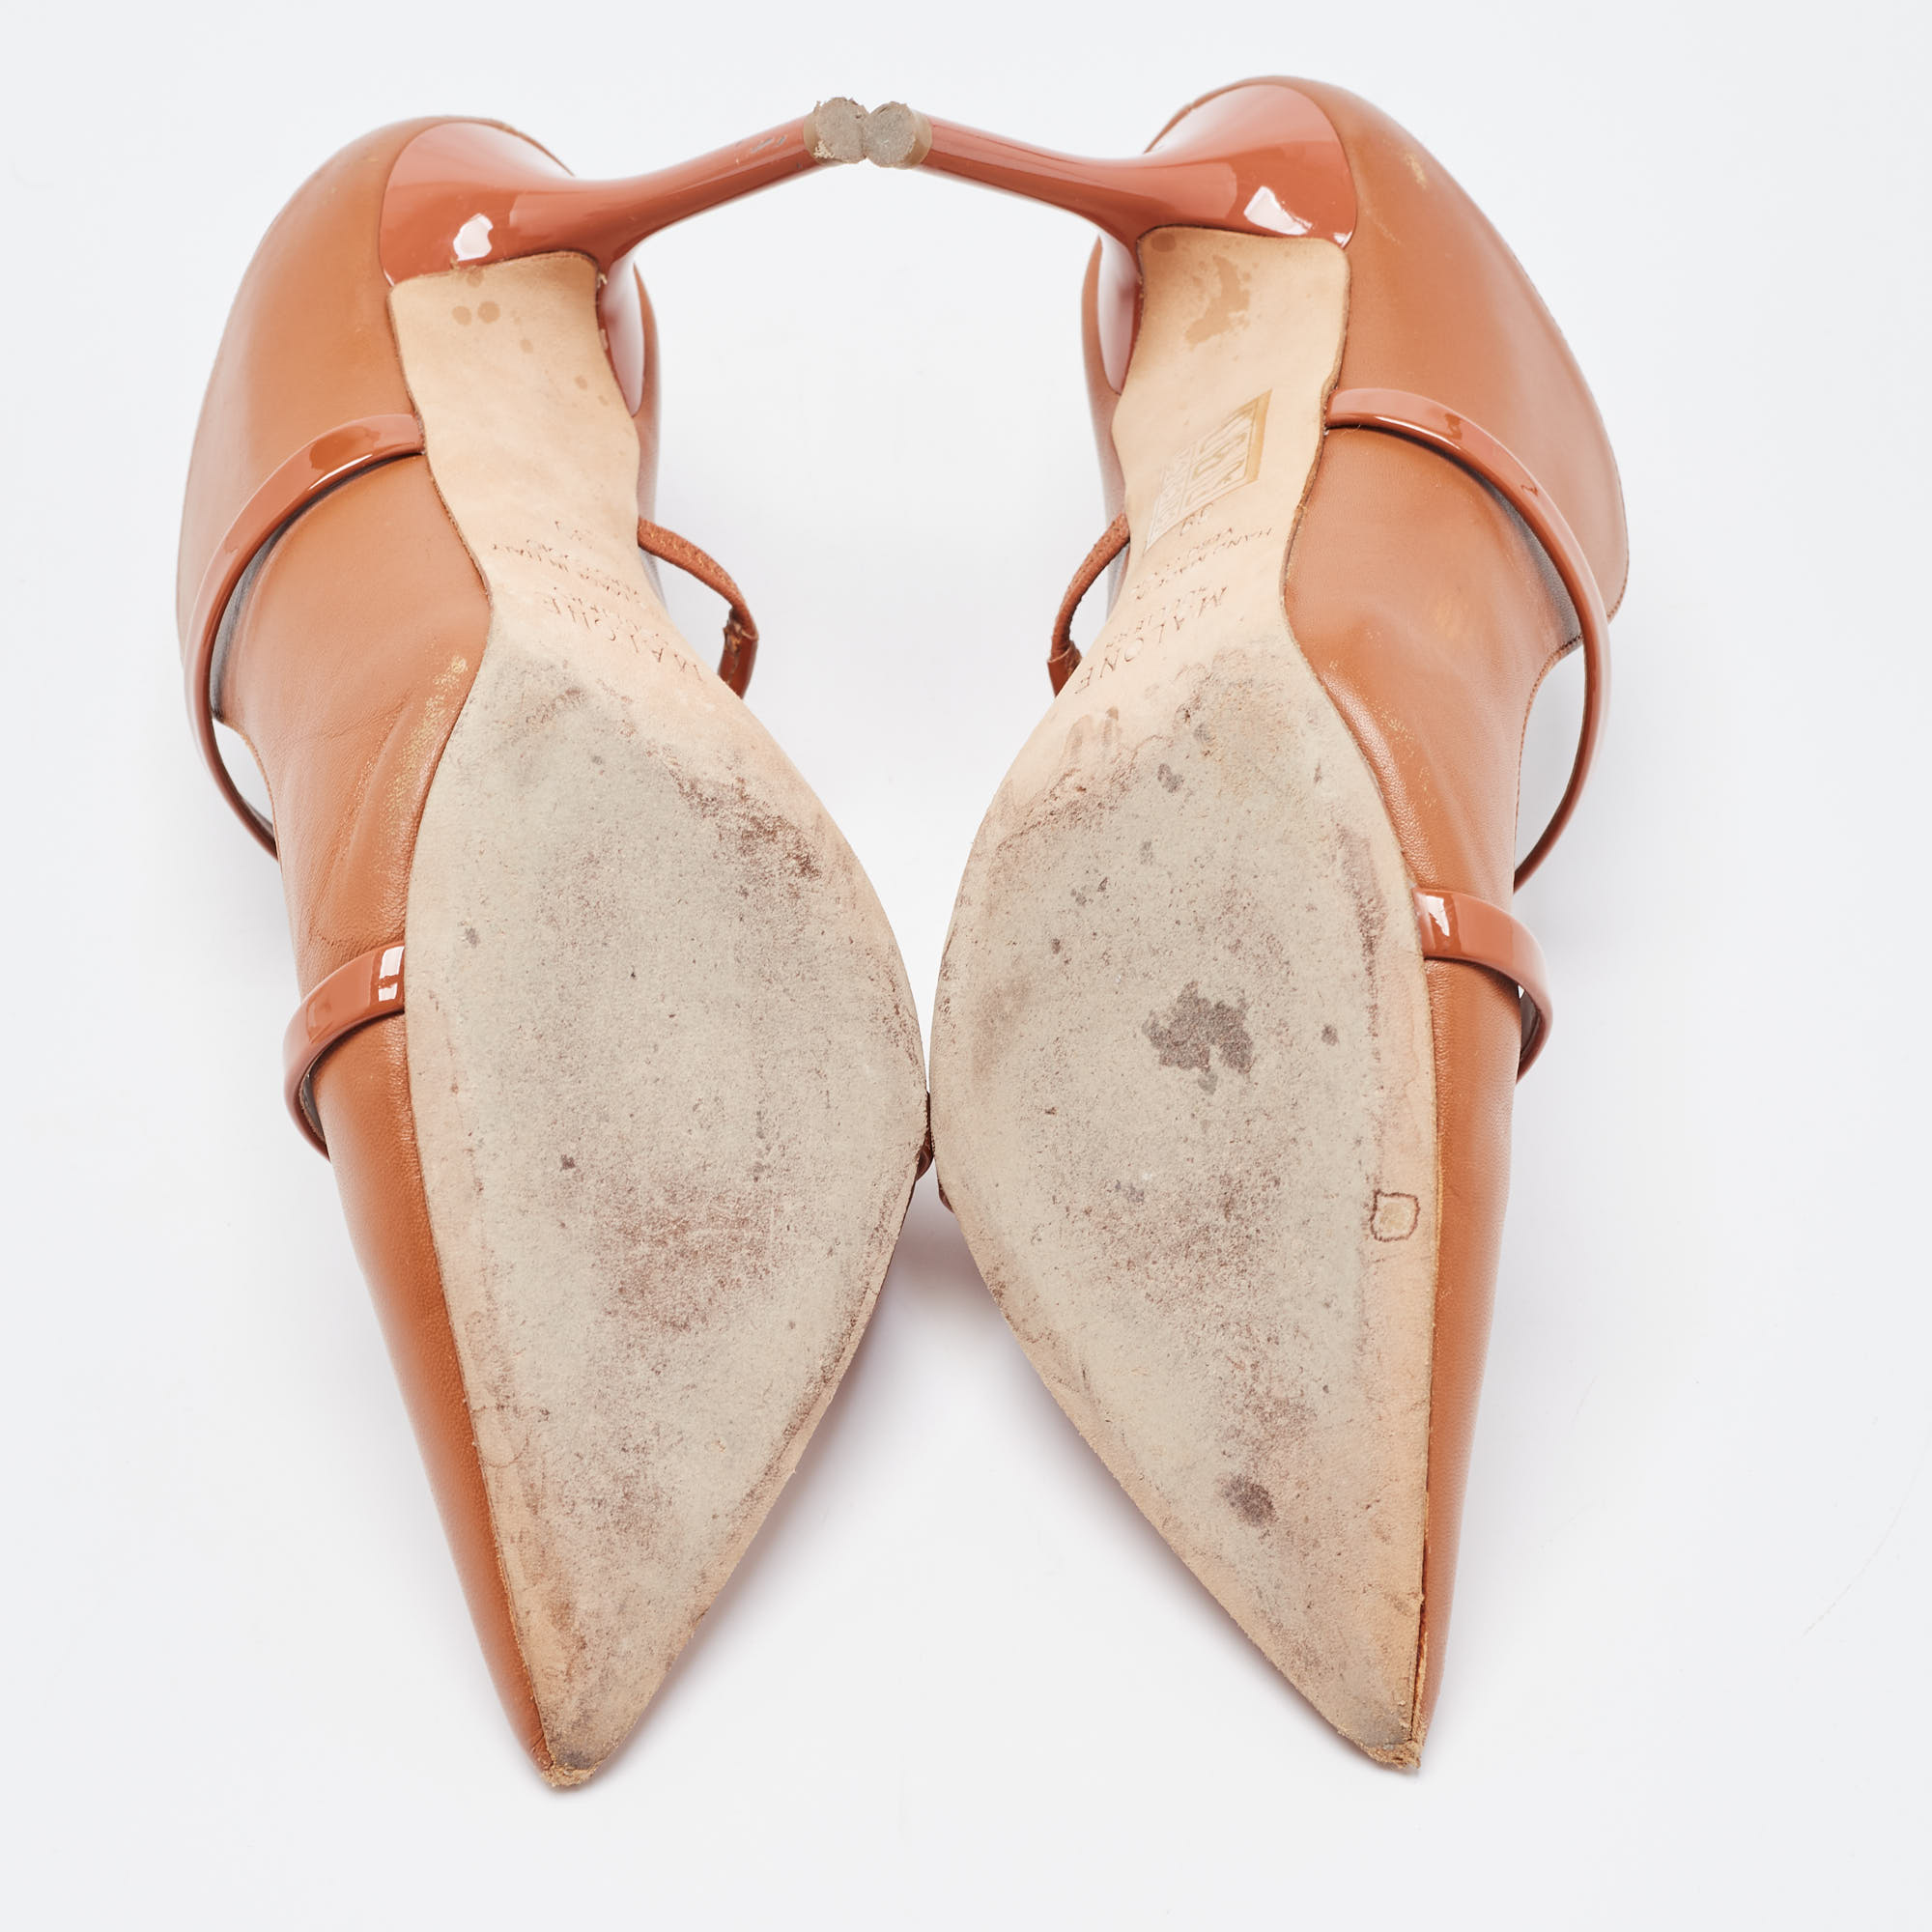 Malone Souliers Tan Leather Maureen Mules Size 39